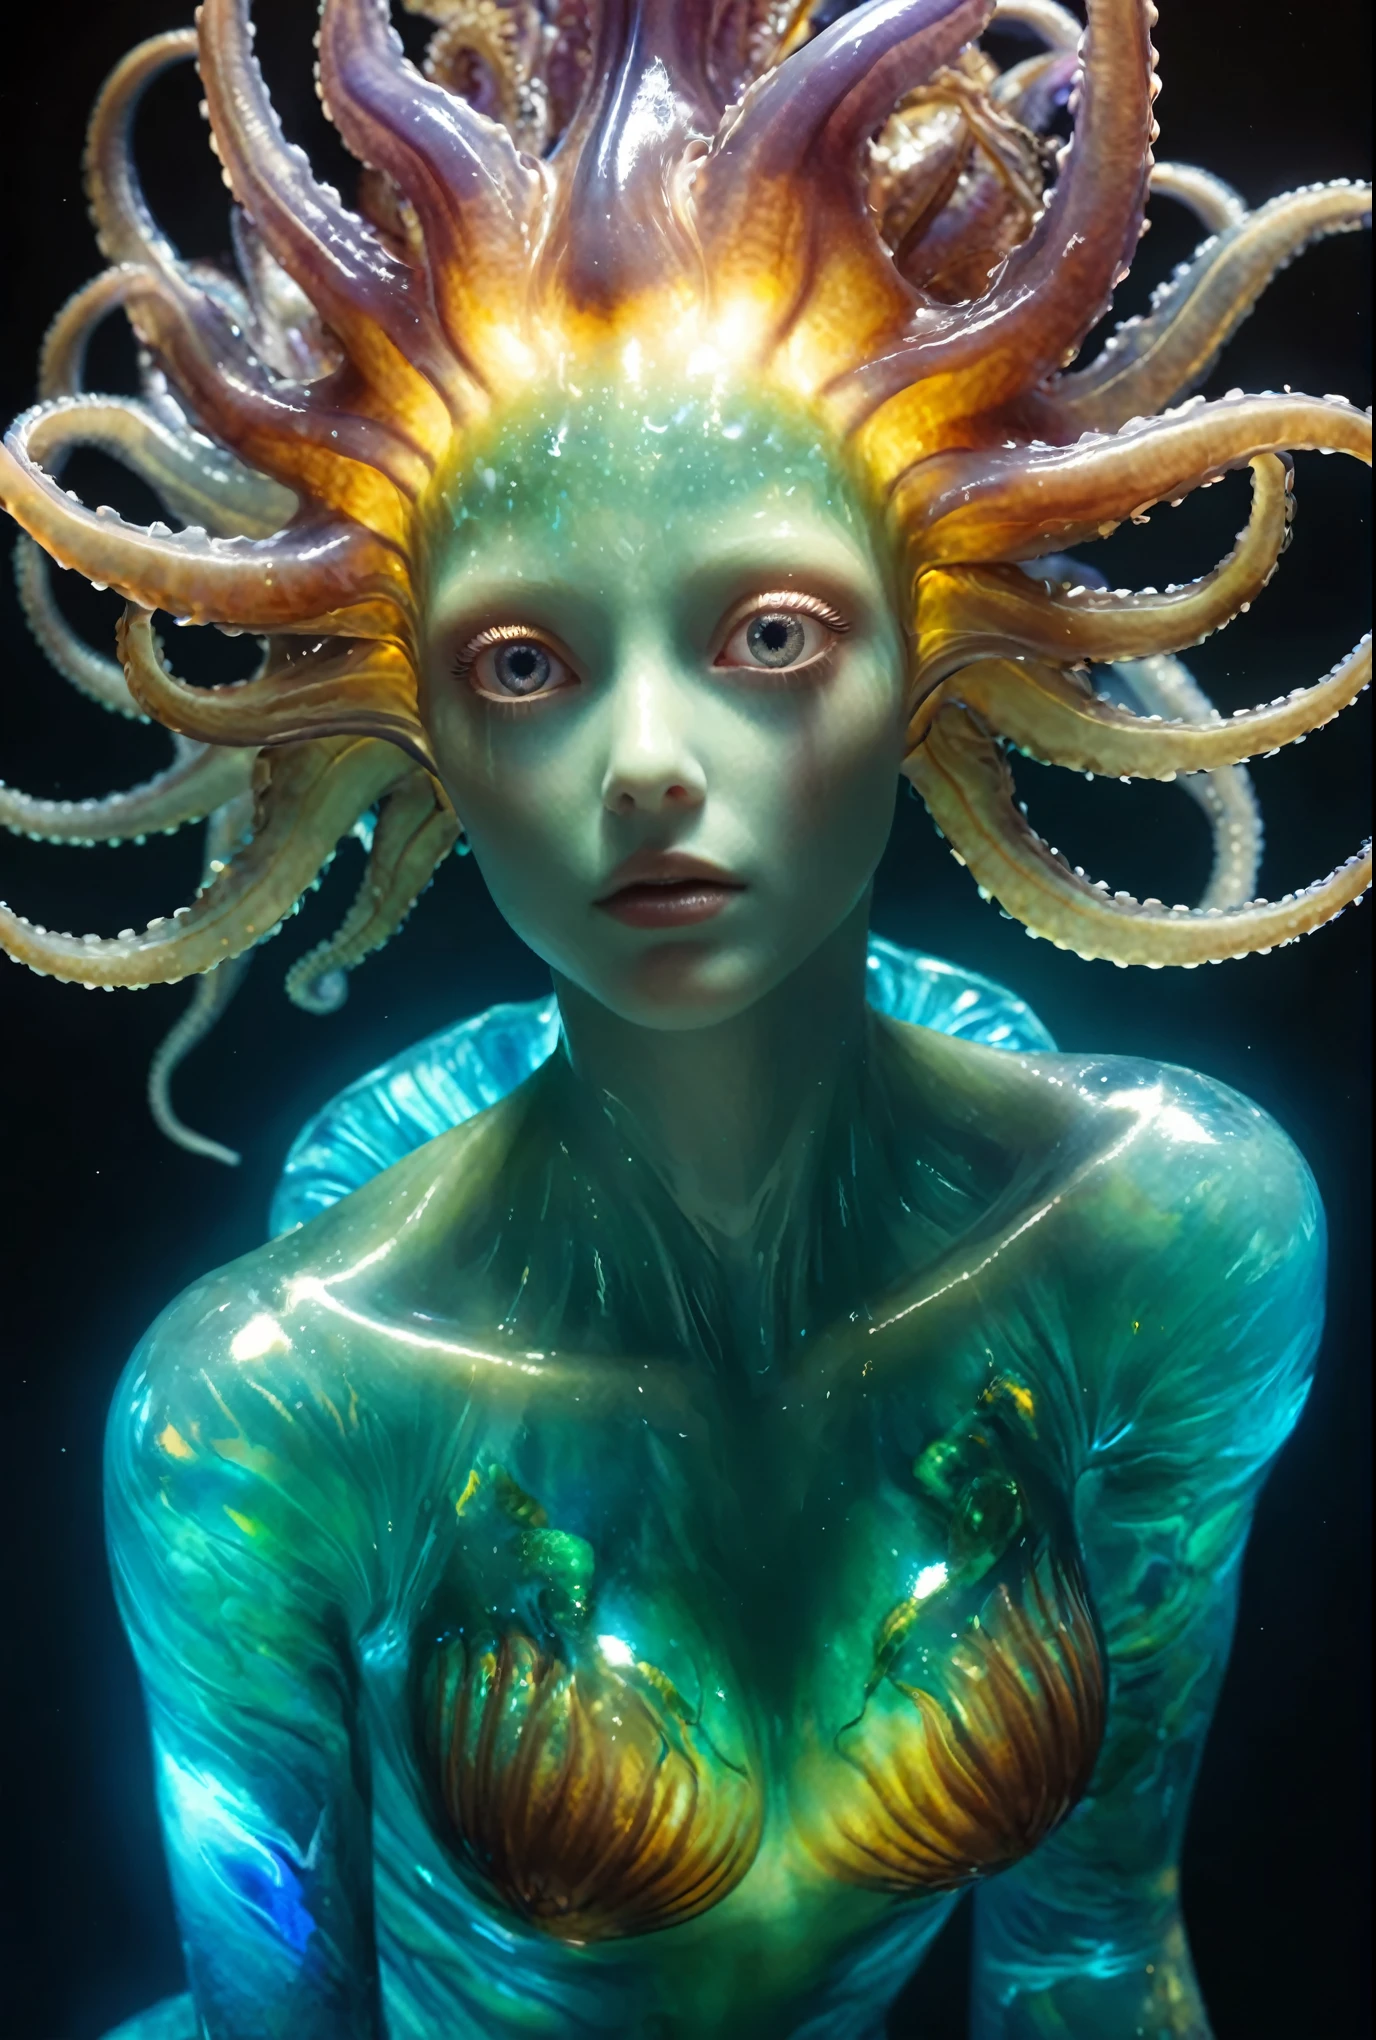 (best qualityer,4K,high resolution,work of art:1.2),ultra detali,(realisitic,photorealisitic:1.37), (1 beautiful 18 year old jellyfish-like alien:1.8), Underwater, swirly vibrant colors, bioluminescence, surreal, grotesque, beautiful detailed eyes, detailed lips, slimy skin, tentacles, intricate patterns, extraordinary creature, unique anatomy, Ocean environment, Dark abyss, mystifier, uncanny, haunting, weirdcore, fancy, hybrid beauty, ethereal, enchanting lighting, With mesmerizing iridescent glowing markings adorning your body, the intricacies of its tentacle parts highlight the rich colors and beautiful soft light. The vast open waters serve as a vivid backdrop, allowing the octopus to absorb every detail, displaying their absurd and complex forms in unparalleled quality. (realisitic, hyper-realisitic:1.5), bushy eyebrows, (beautiful super detailed opal eyes:1.8), smiling seductively, (no-makeup:1.7), (Exoskeleton with beautiful Nautilus design:1.8), Pale, white skin with visible veins, beautiful nipples, face painting with nautilus design,